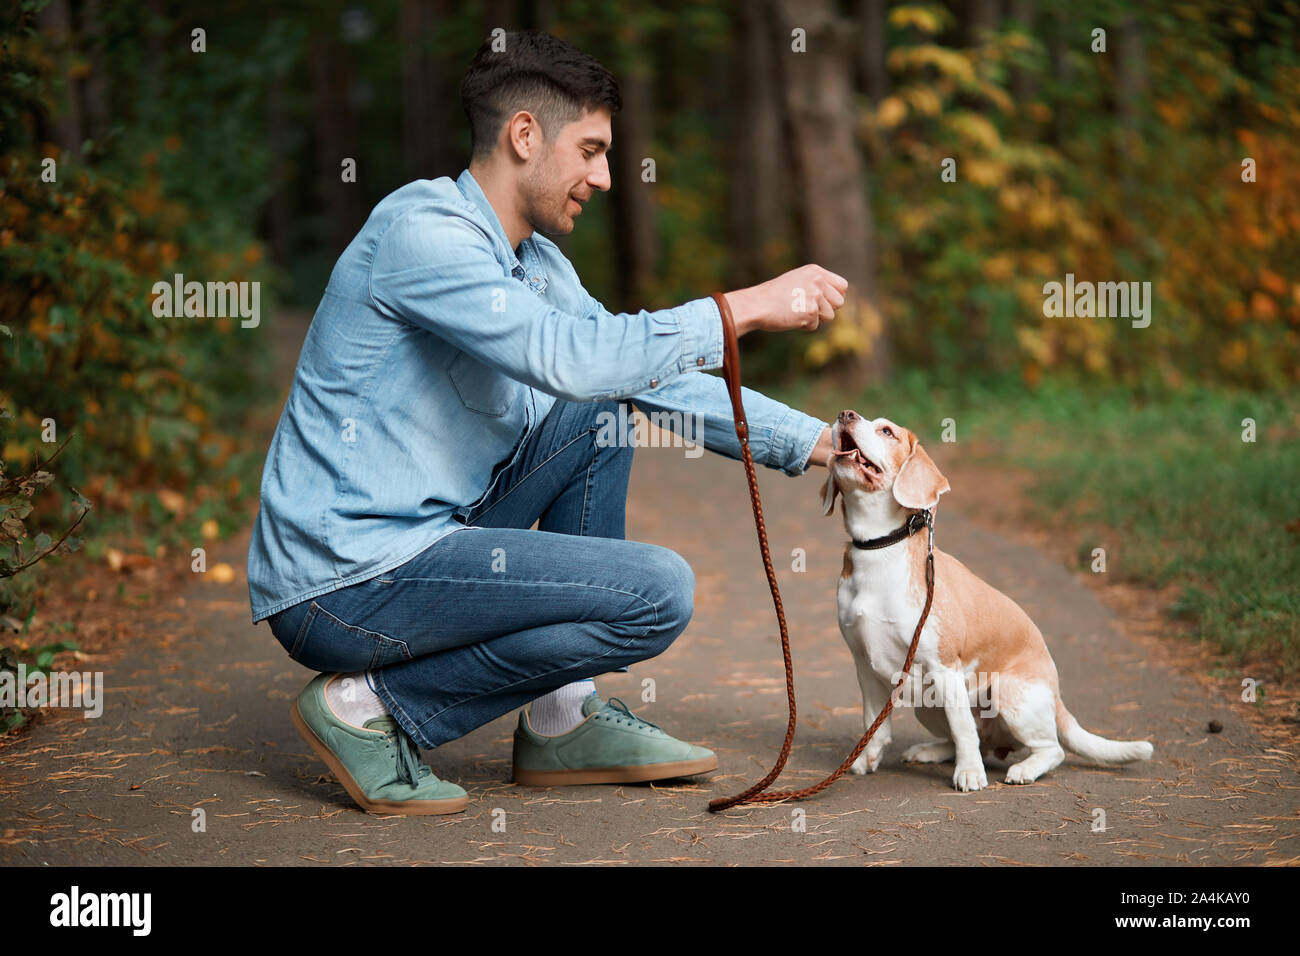 young good looking man training his petto perform some actions, full length side view photo Stock Photo